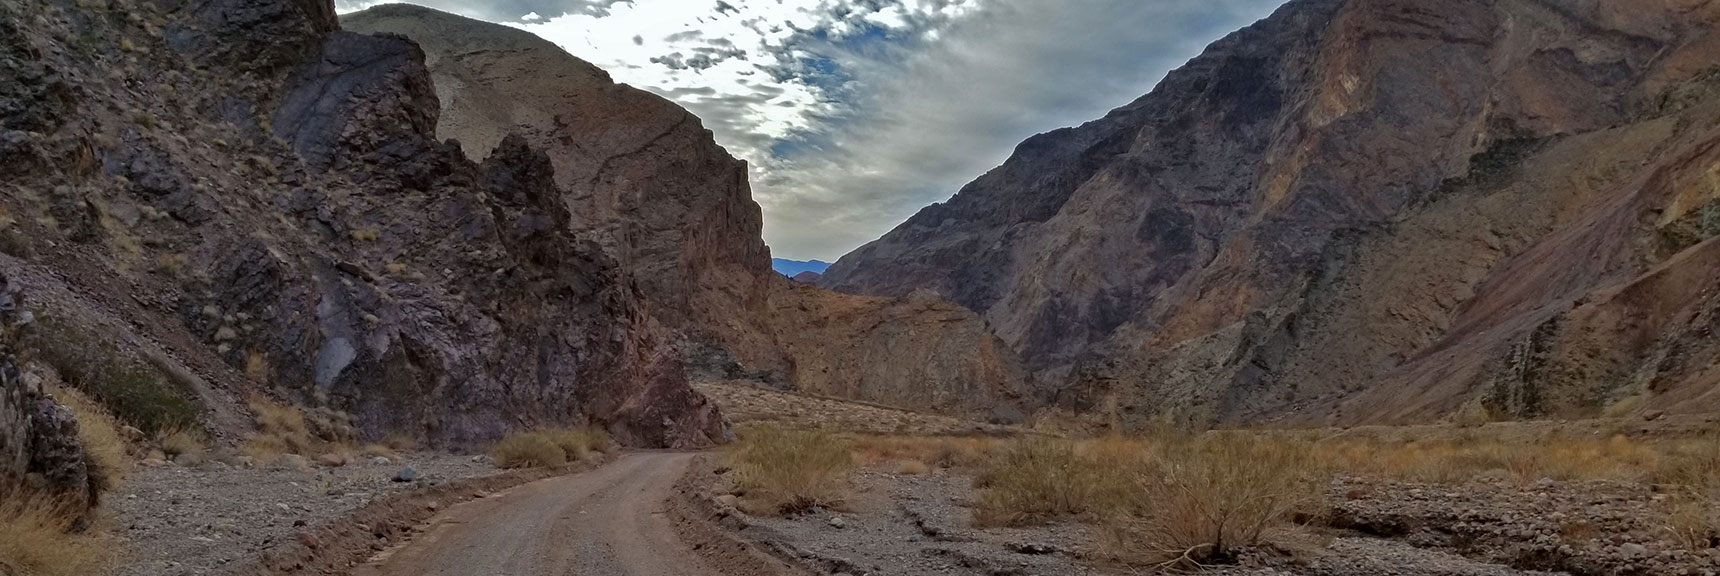 Continuing Down Titus Canyon Below the Petroglyphs. | Titus Canyon Grand Loop by Mountain Bike | Death Valley National Park, California